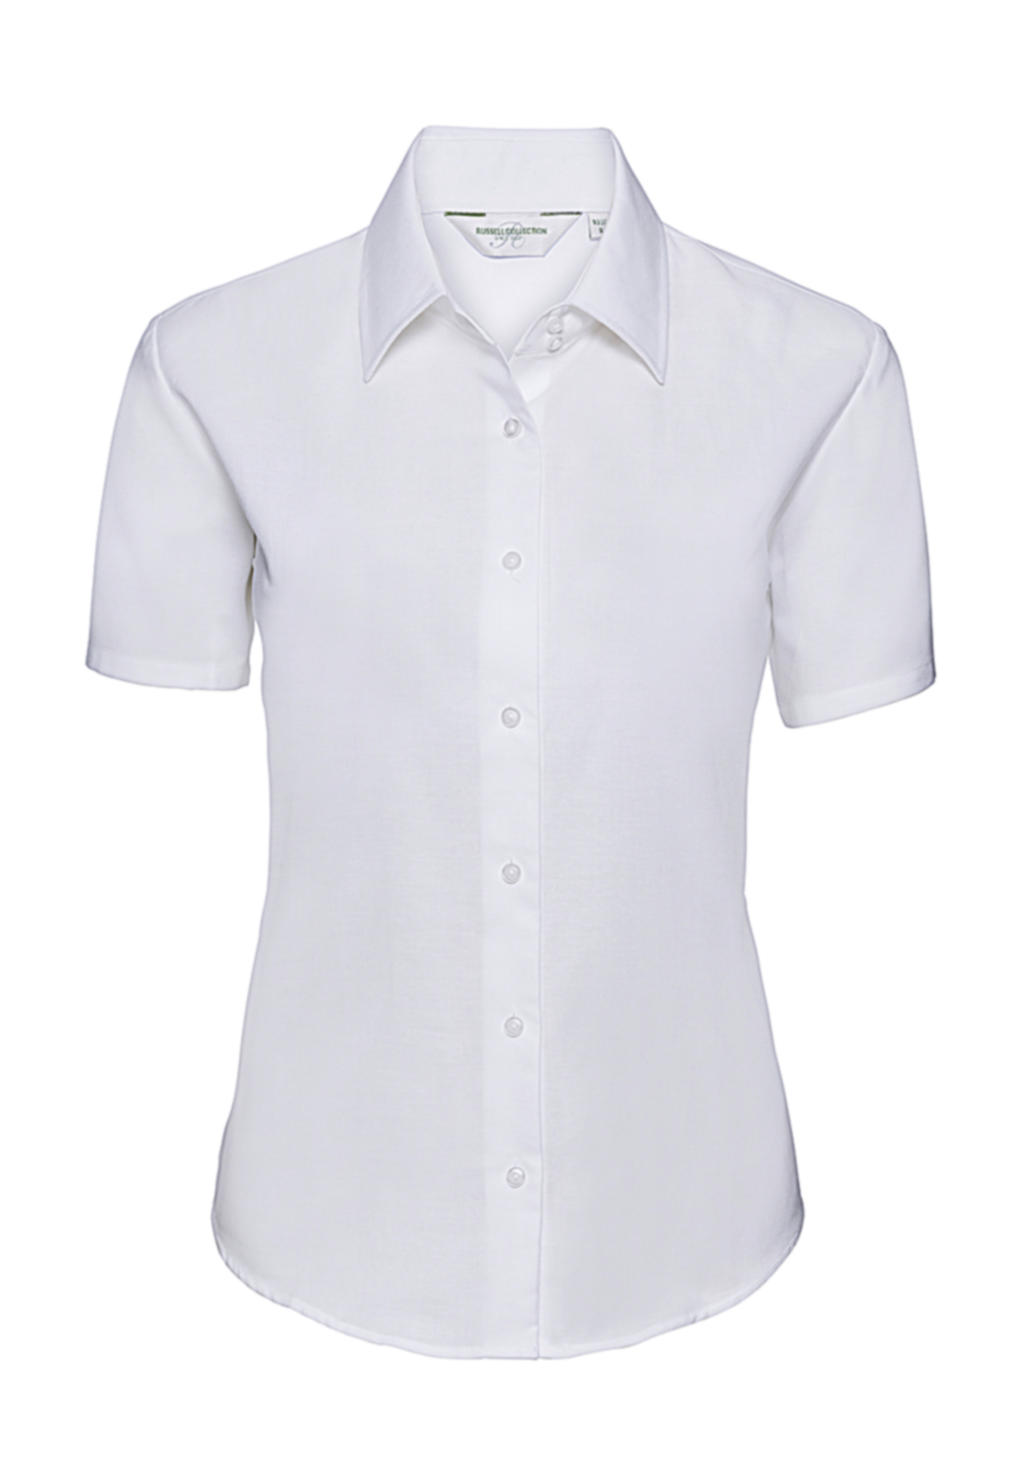  Ladies Classic Oxford Shirt in Farbe White